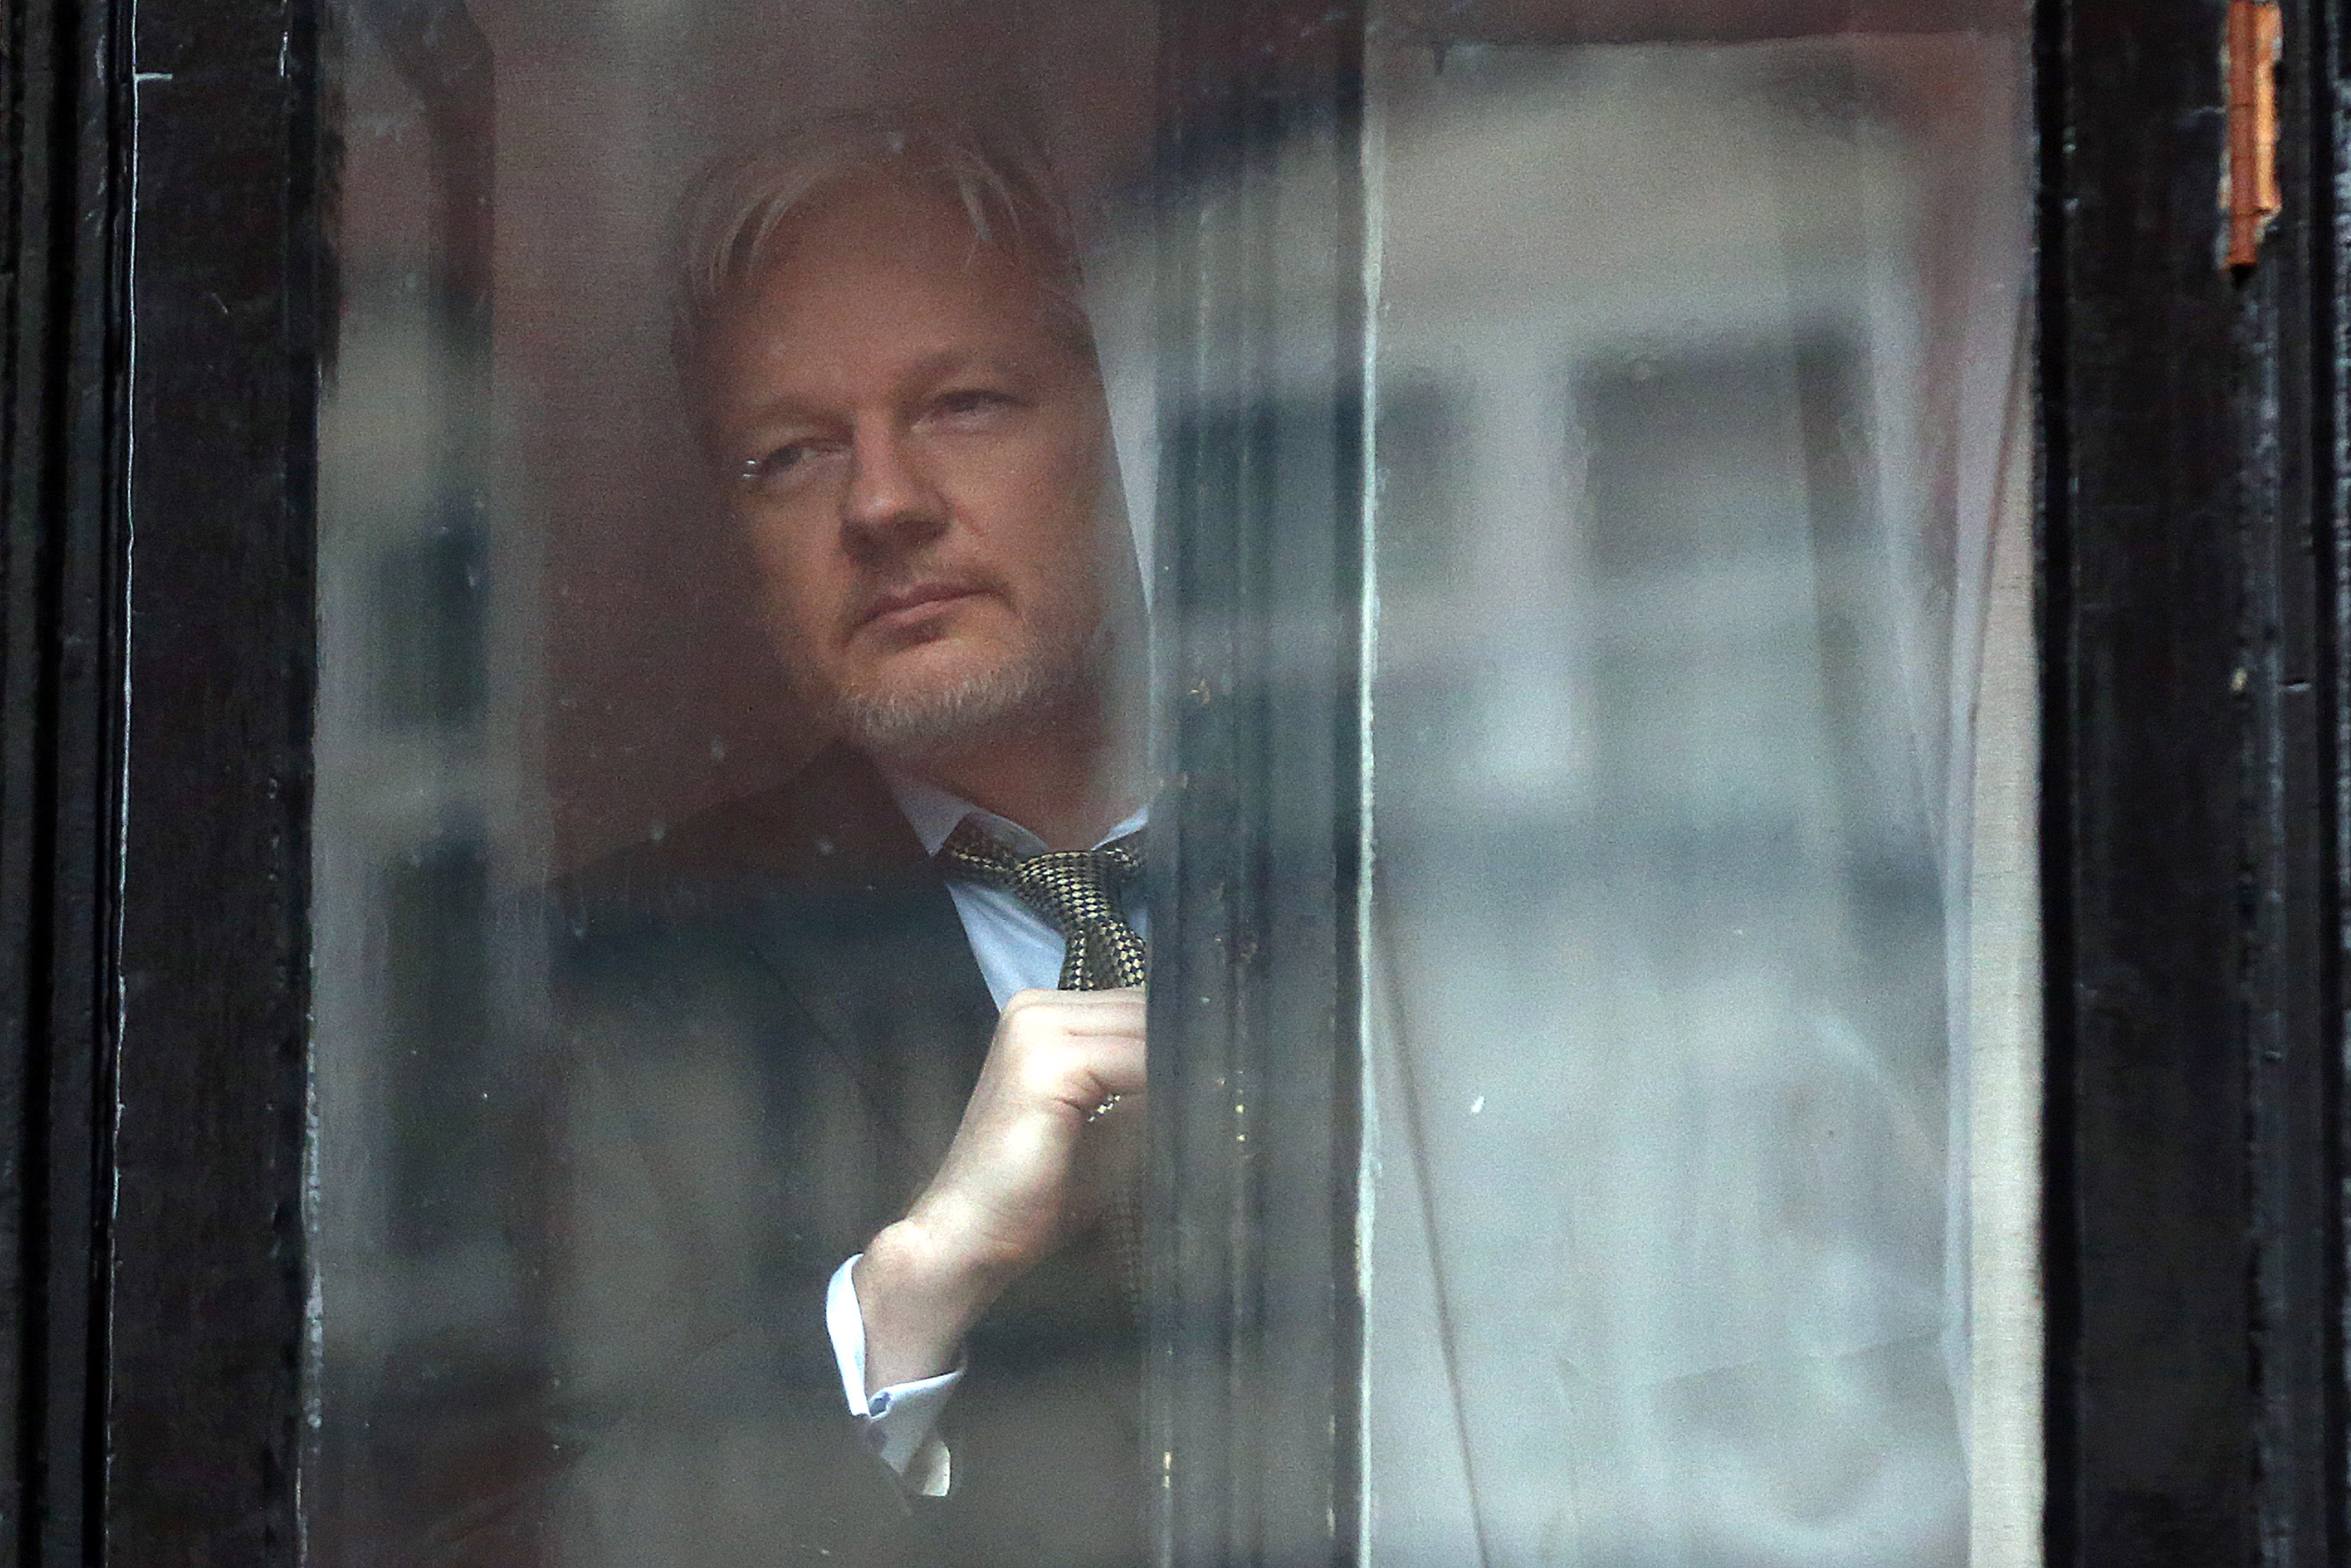 Wikileaks founder Julian Assange prepares to speak from the balcony of the Ecuadorian embassy where  he continues to seek asylum following an extradition request from Sweden in 2012, on February 5, 2016 in London, England.